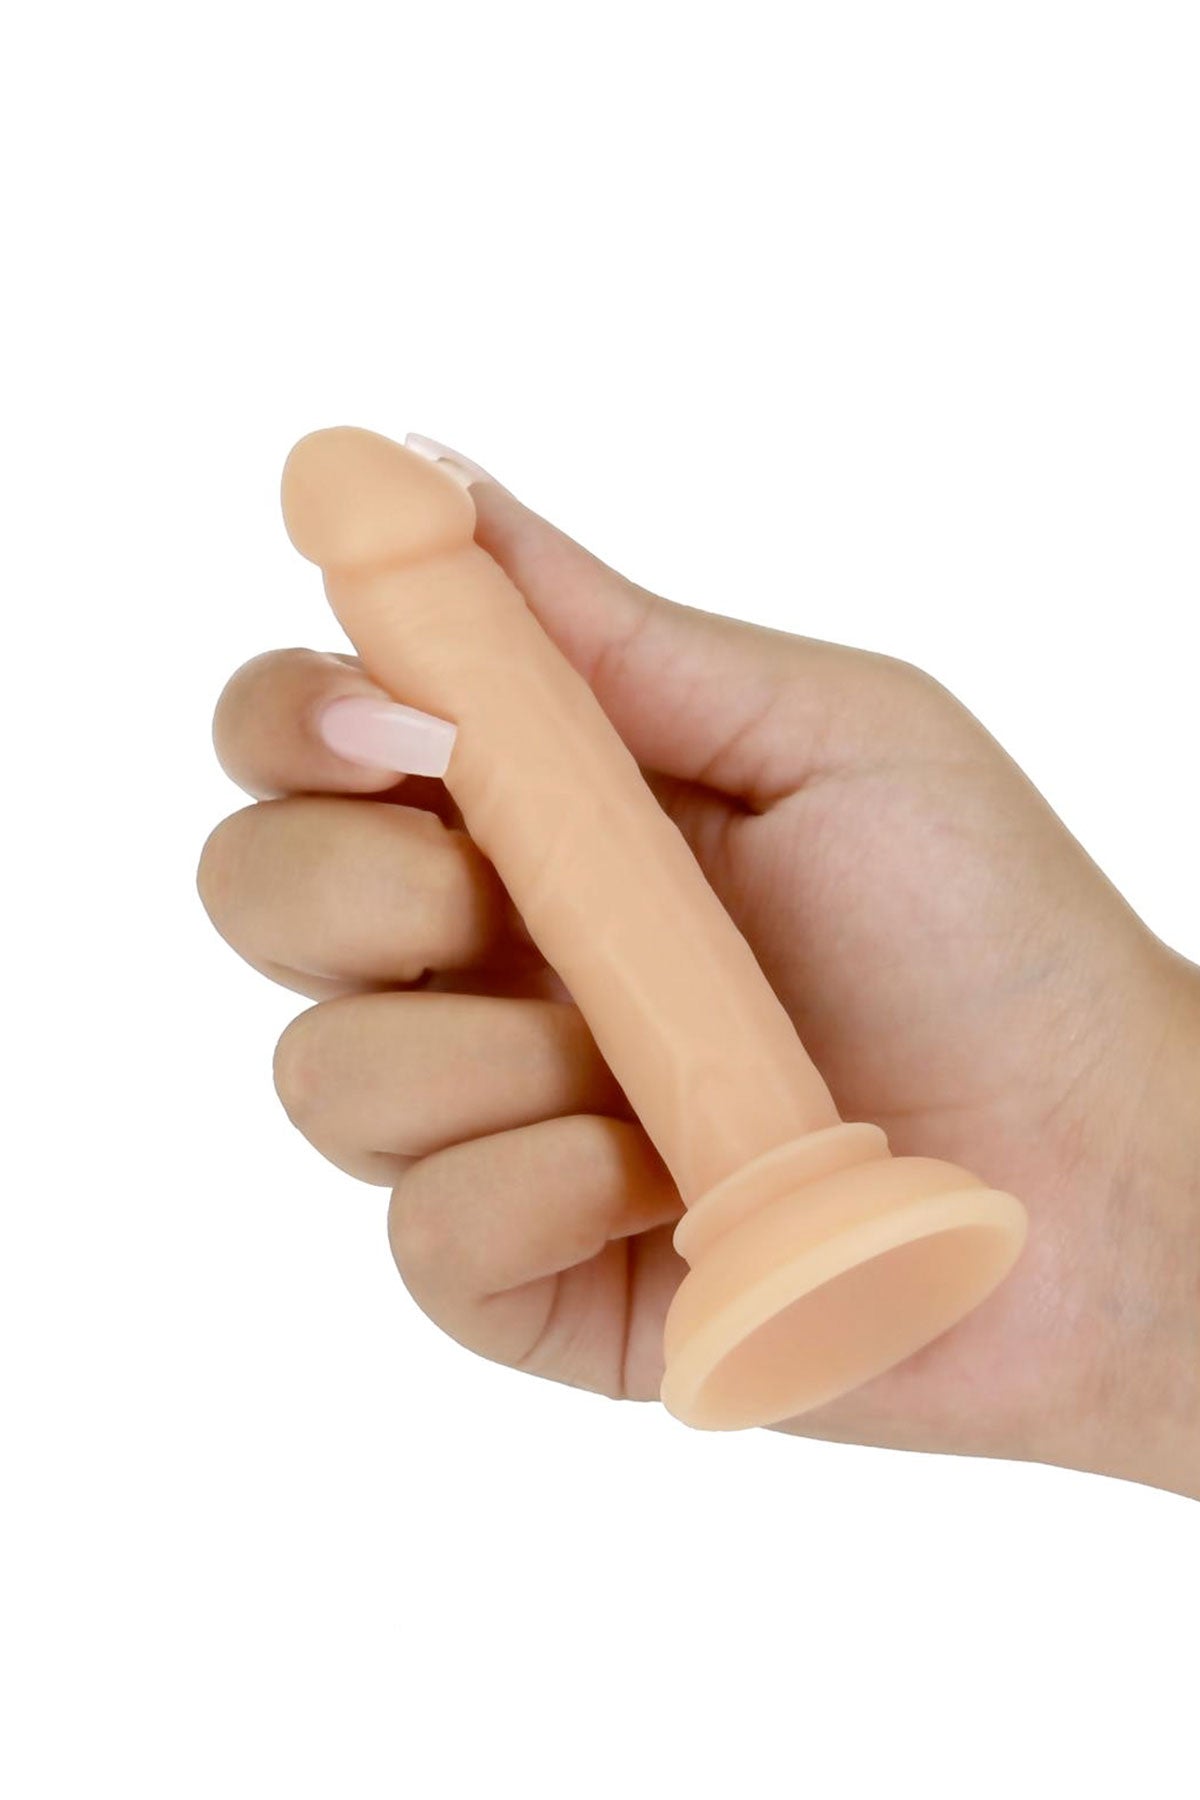 Small Tino Suction Cup Dildo by Swan Addition